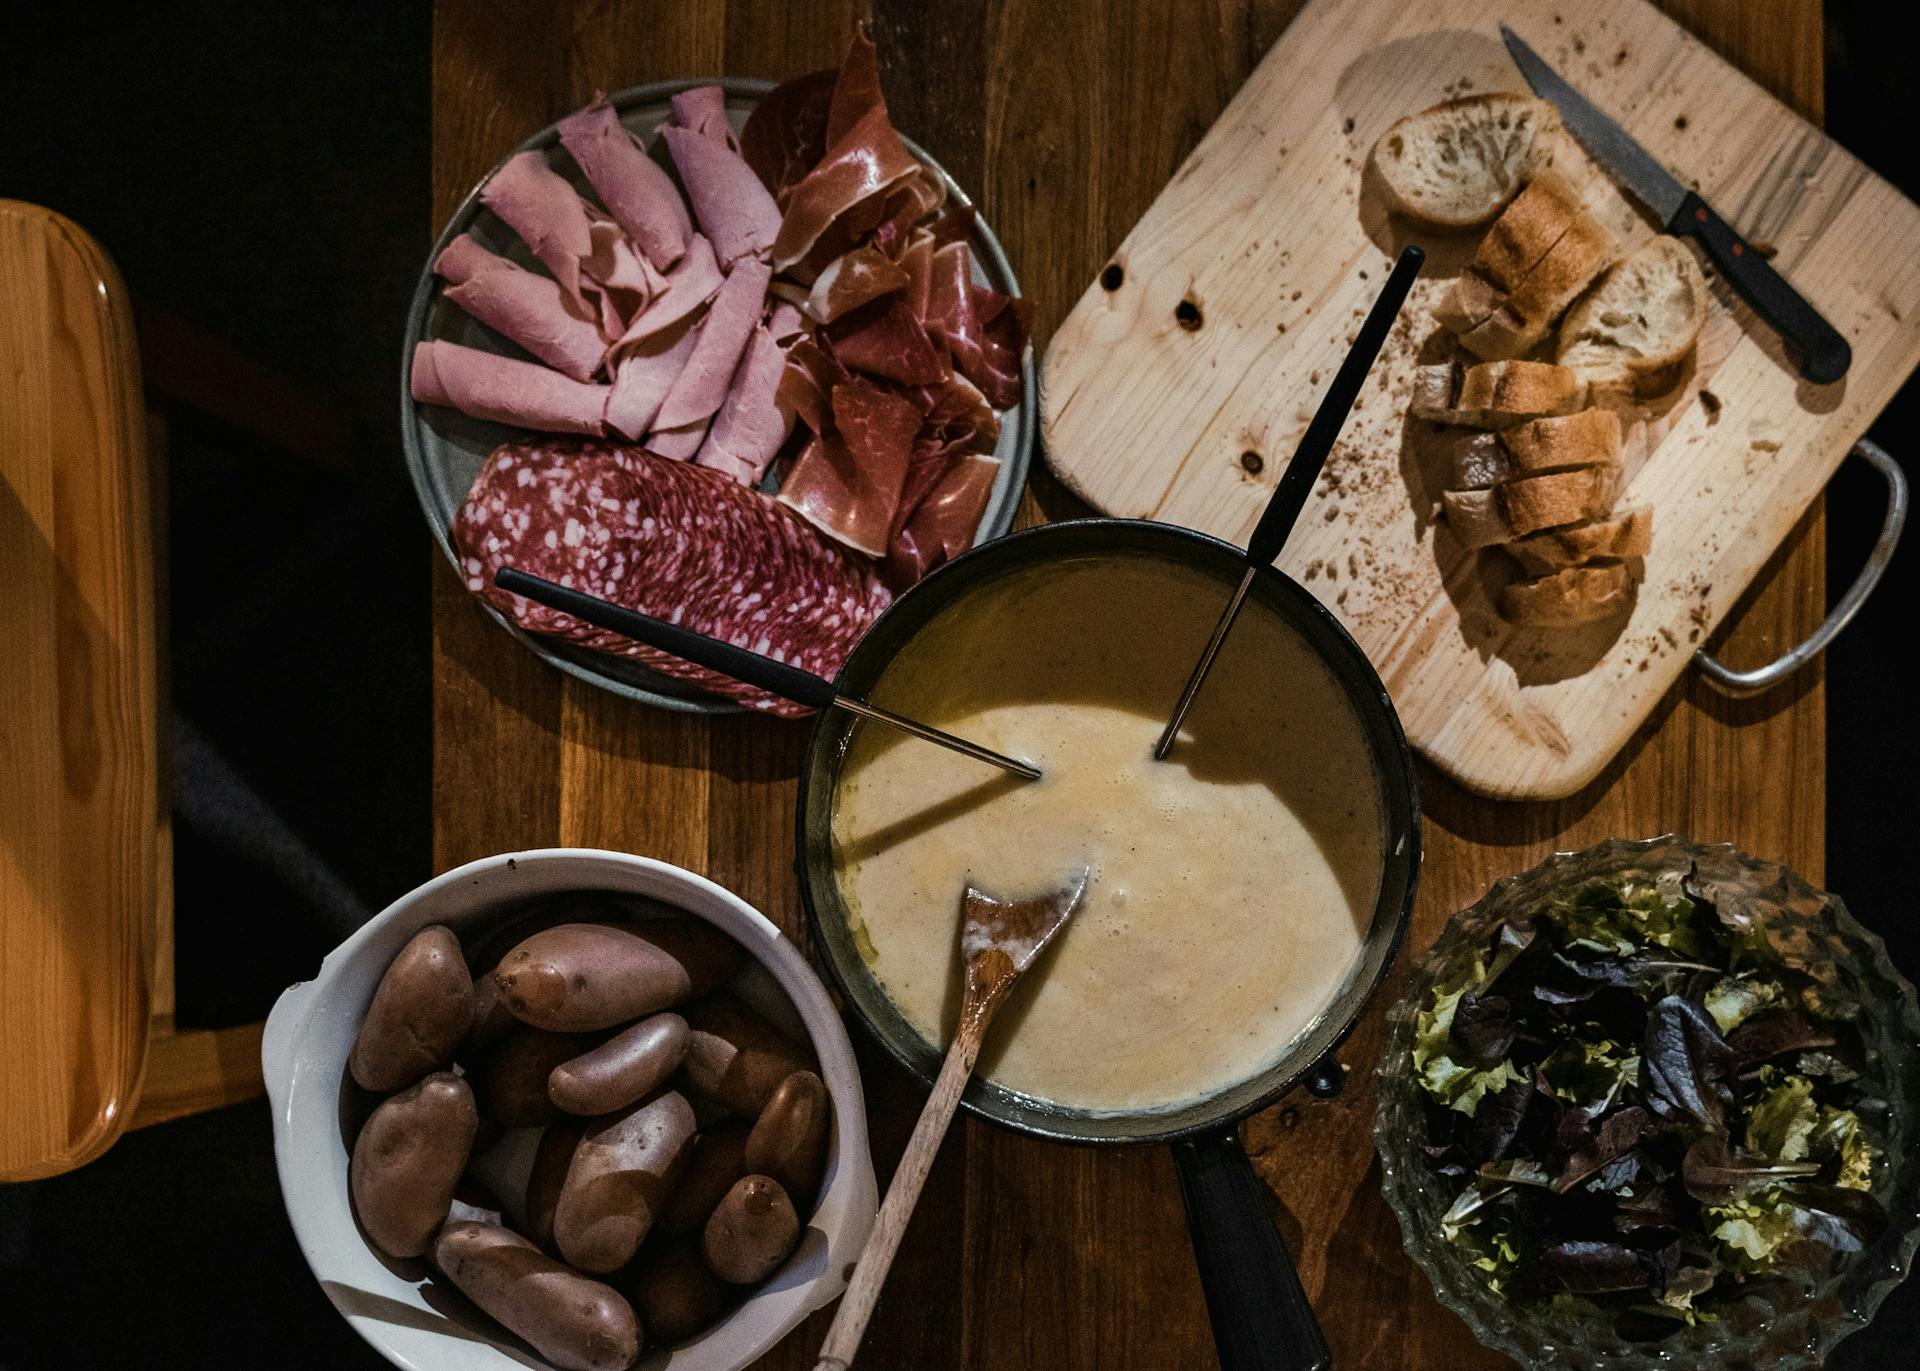 Cheesy fondue and cured meats at French Alps restaurant